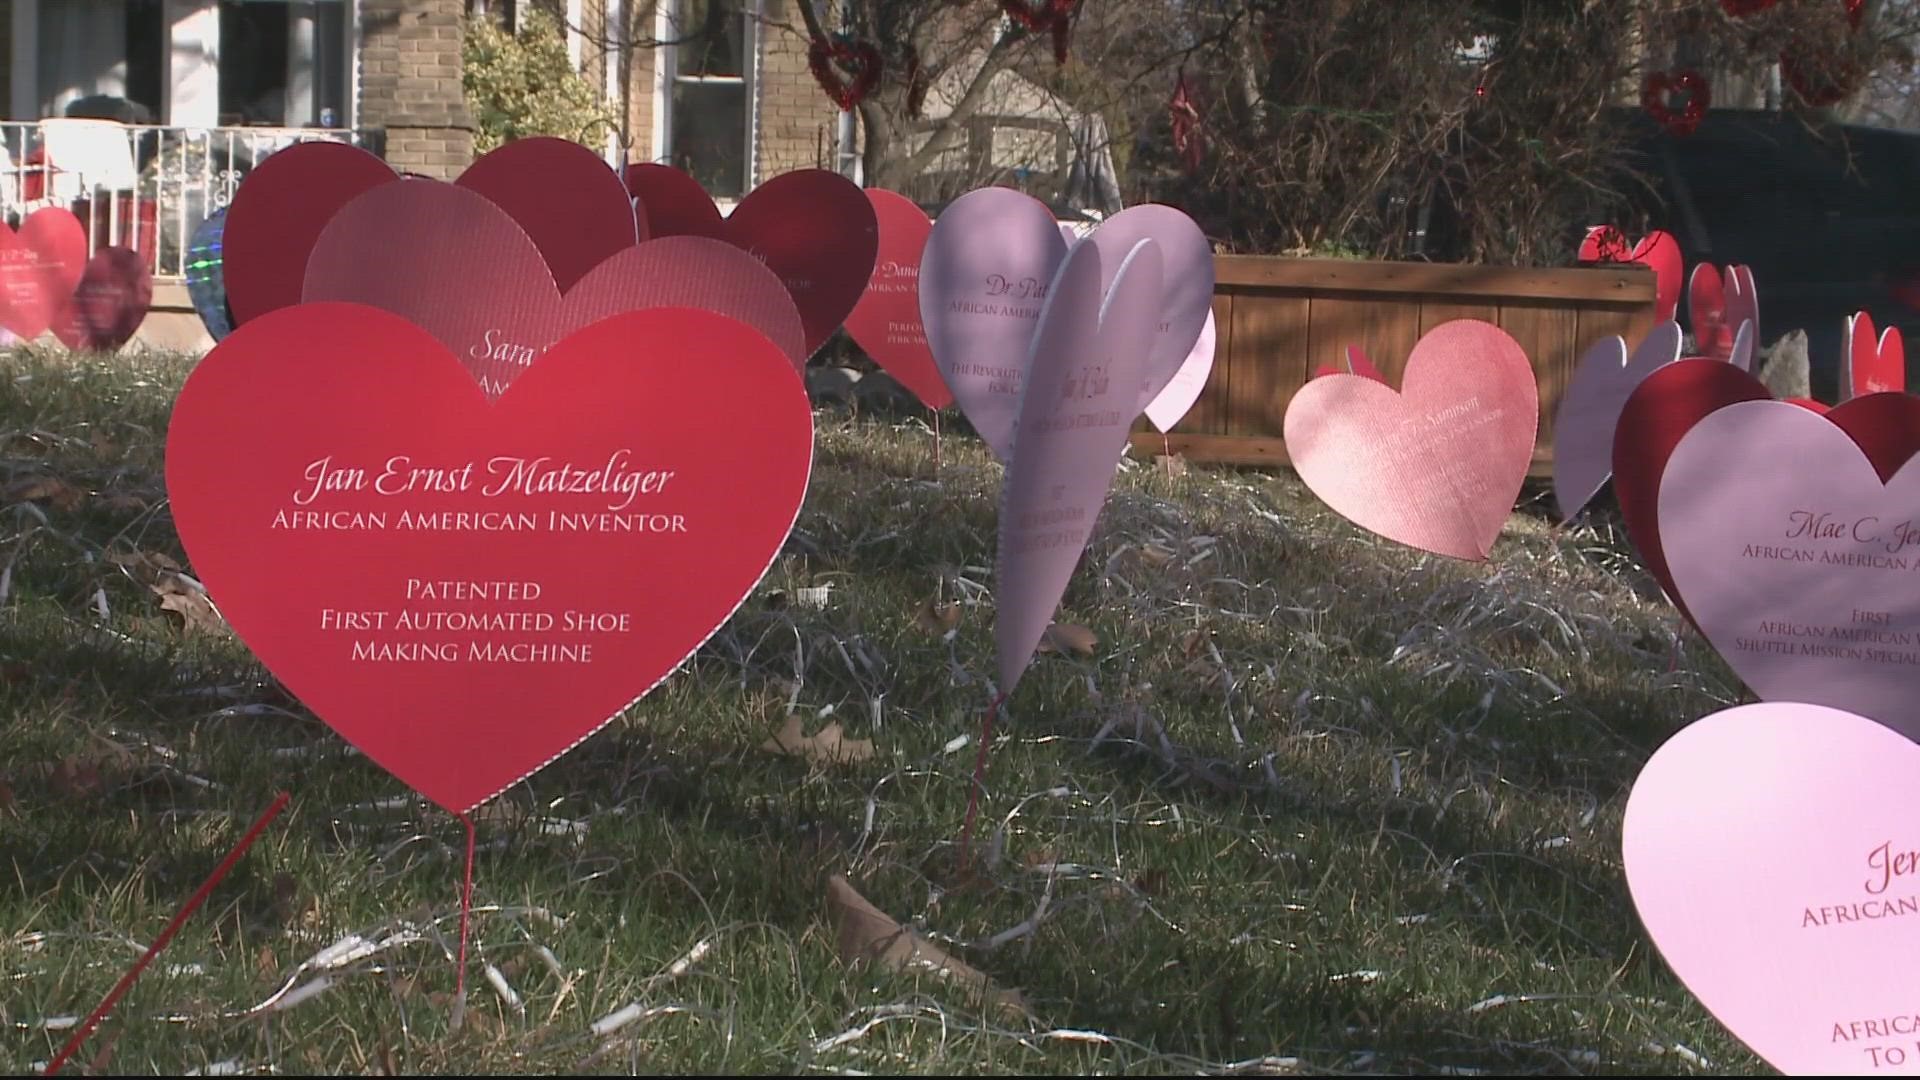 In an effort to spark curiosity and love, one woman has combined Black History Month with Valentine's Day for a colorful display in her yard in Northwest D.C.